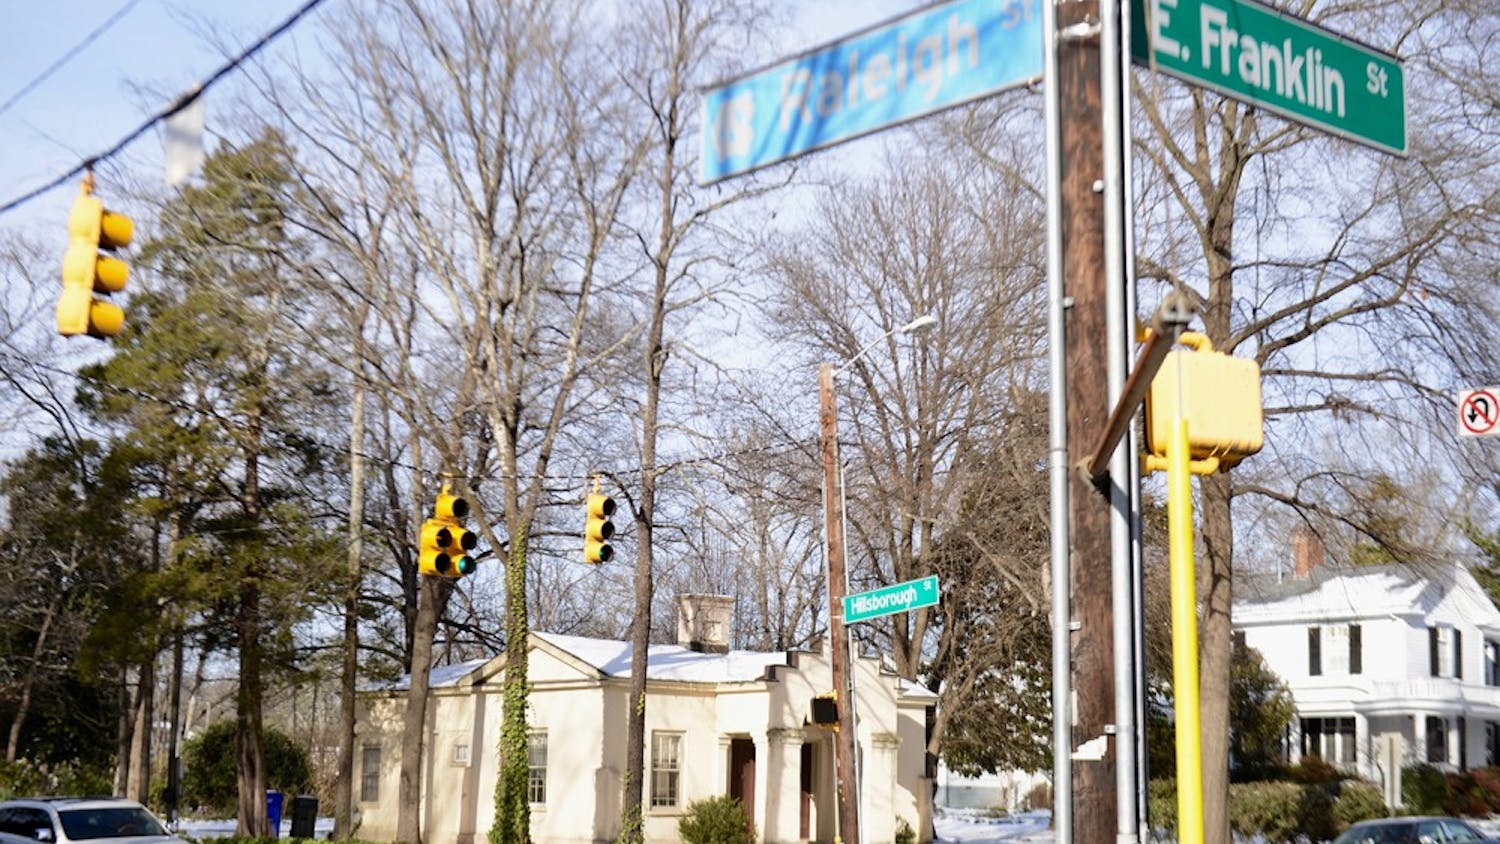 A left turning traffic light was installed at the intersection of Raleigh Street and East Franklin Street.&nbsp;